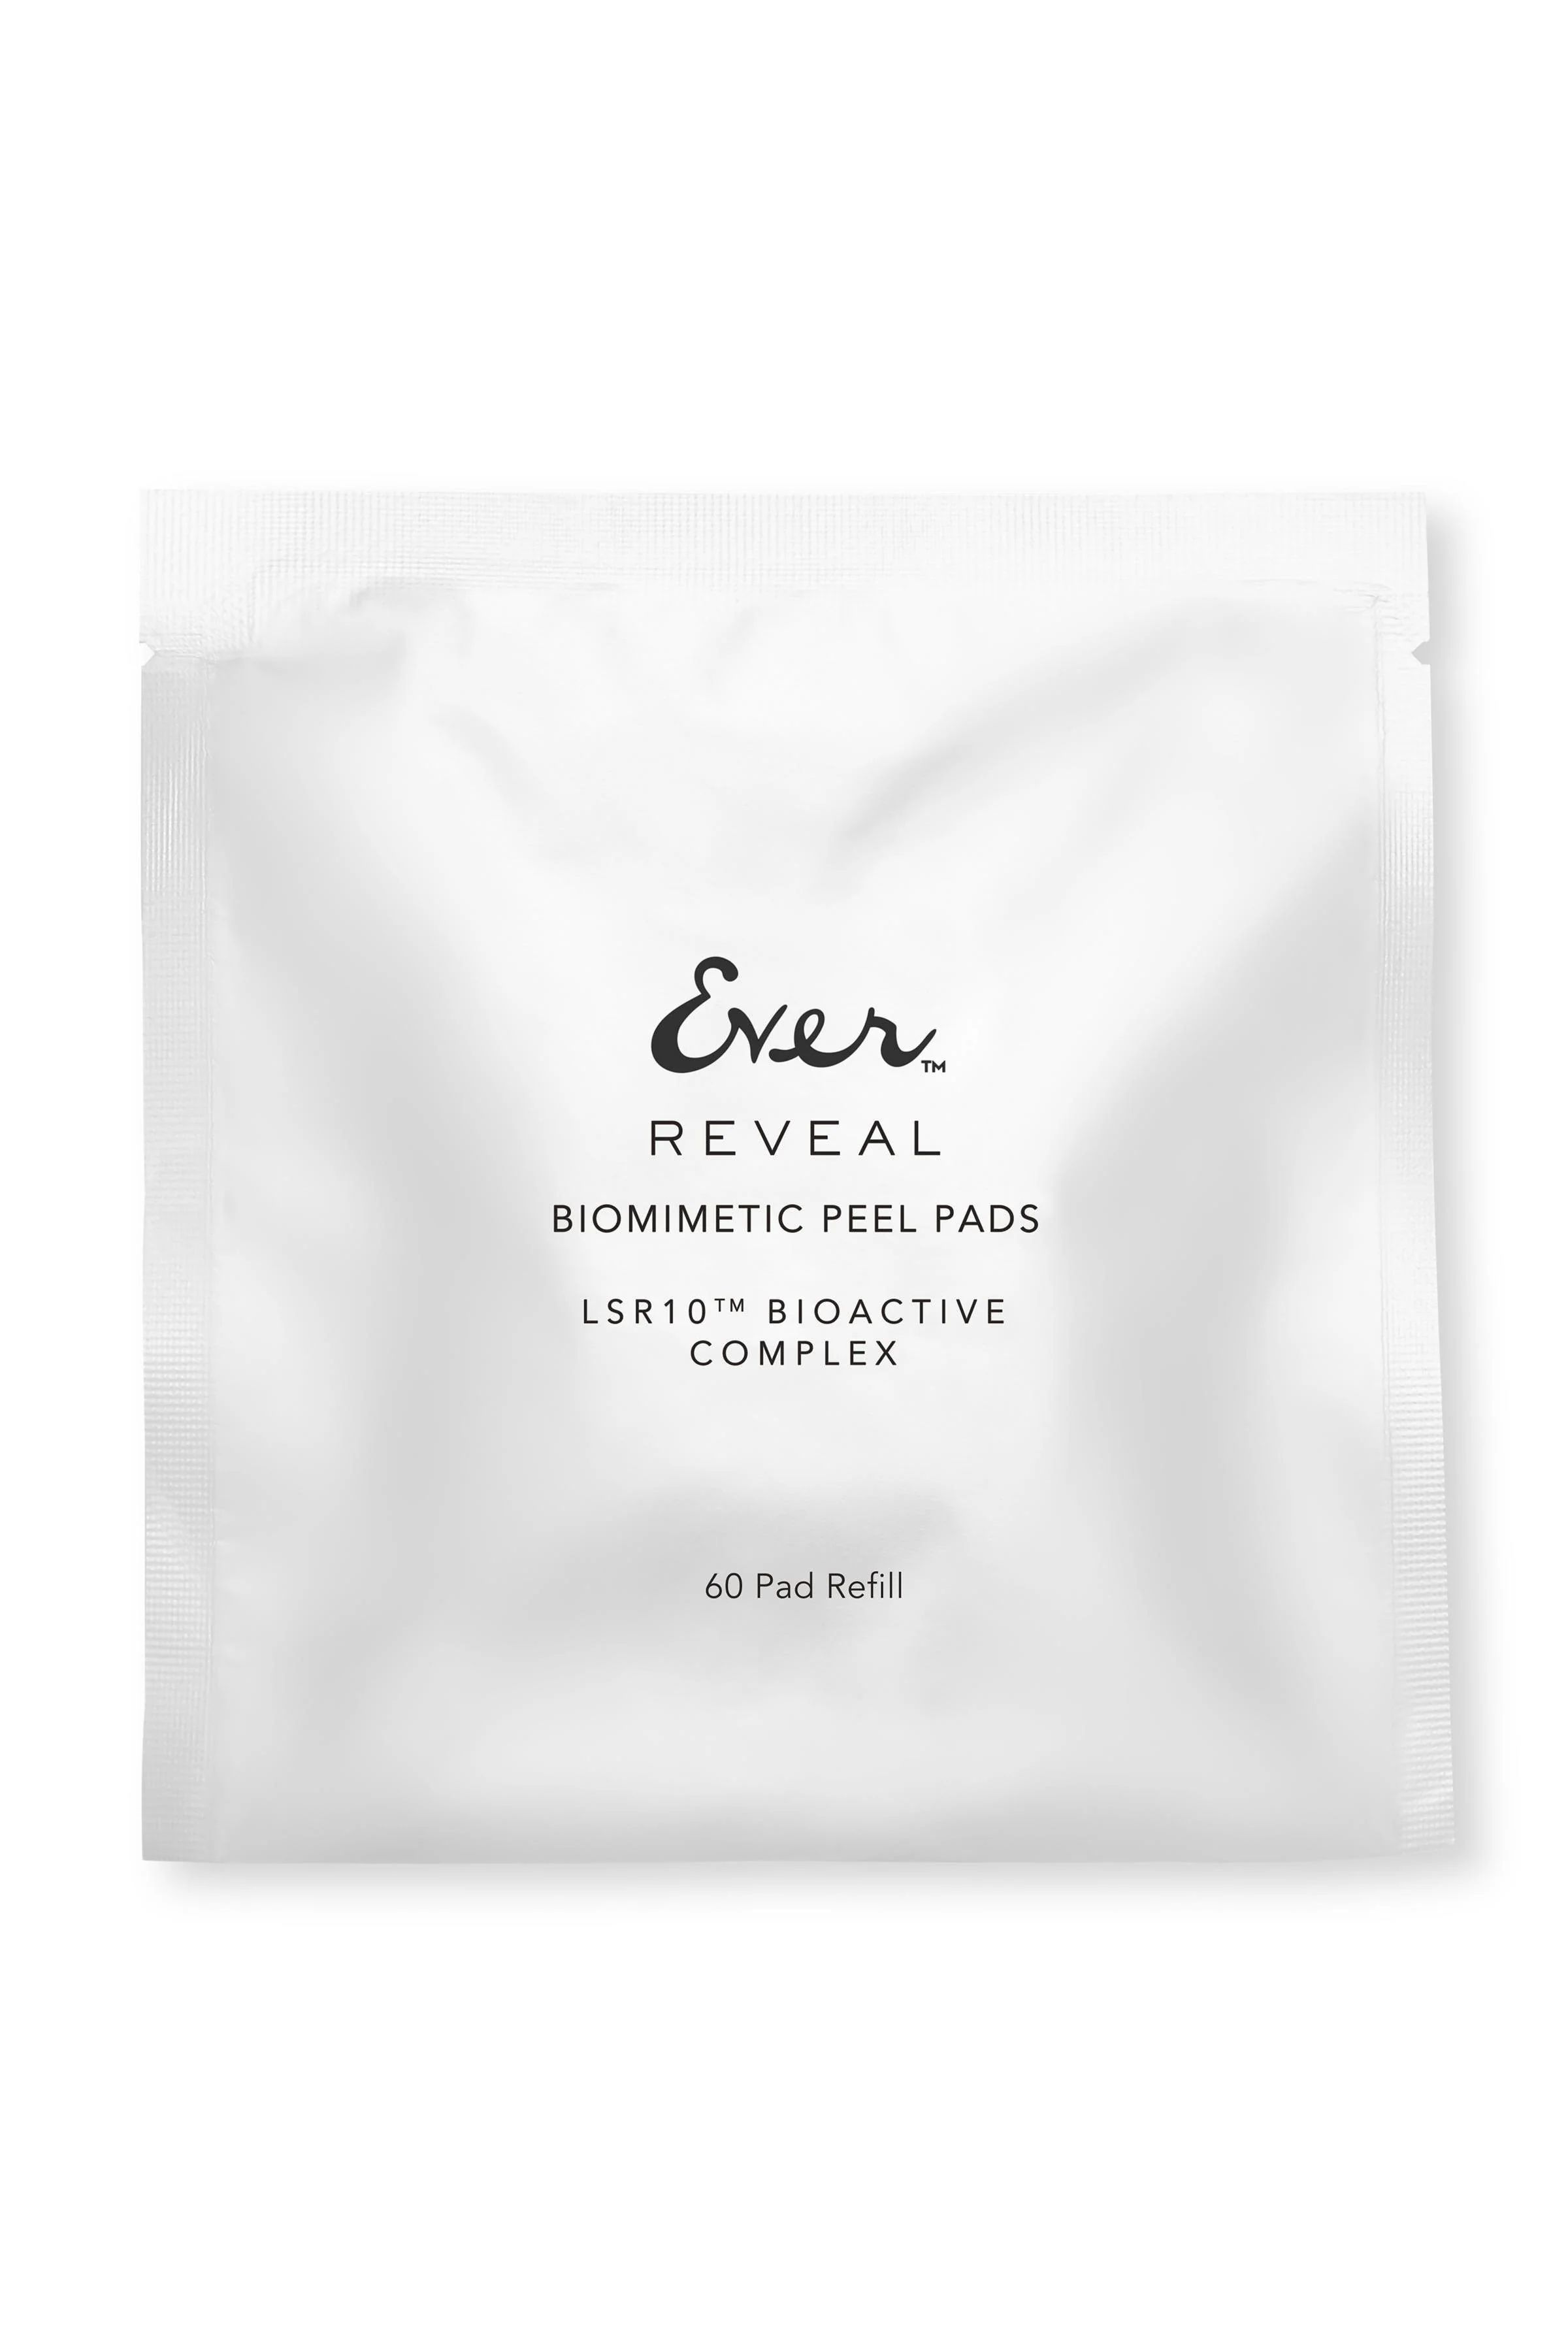 REVEAL 60 Pad Refill Biomimetic Peel Pads with LSR10® | EVER Skincare